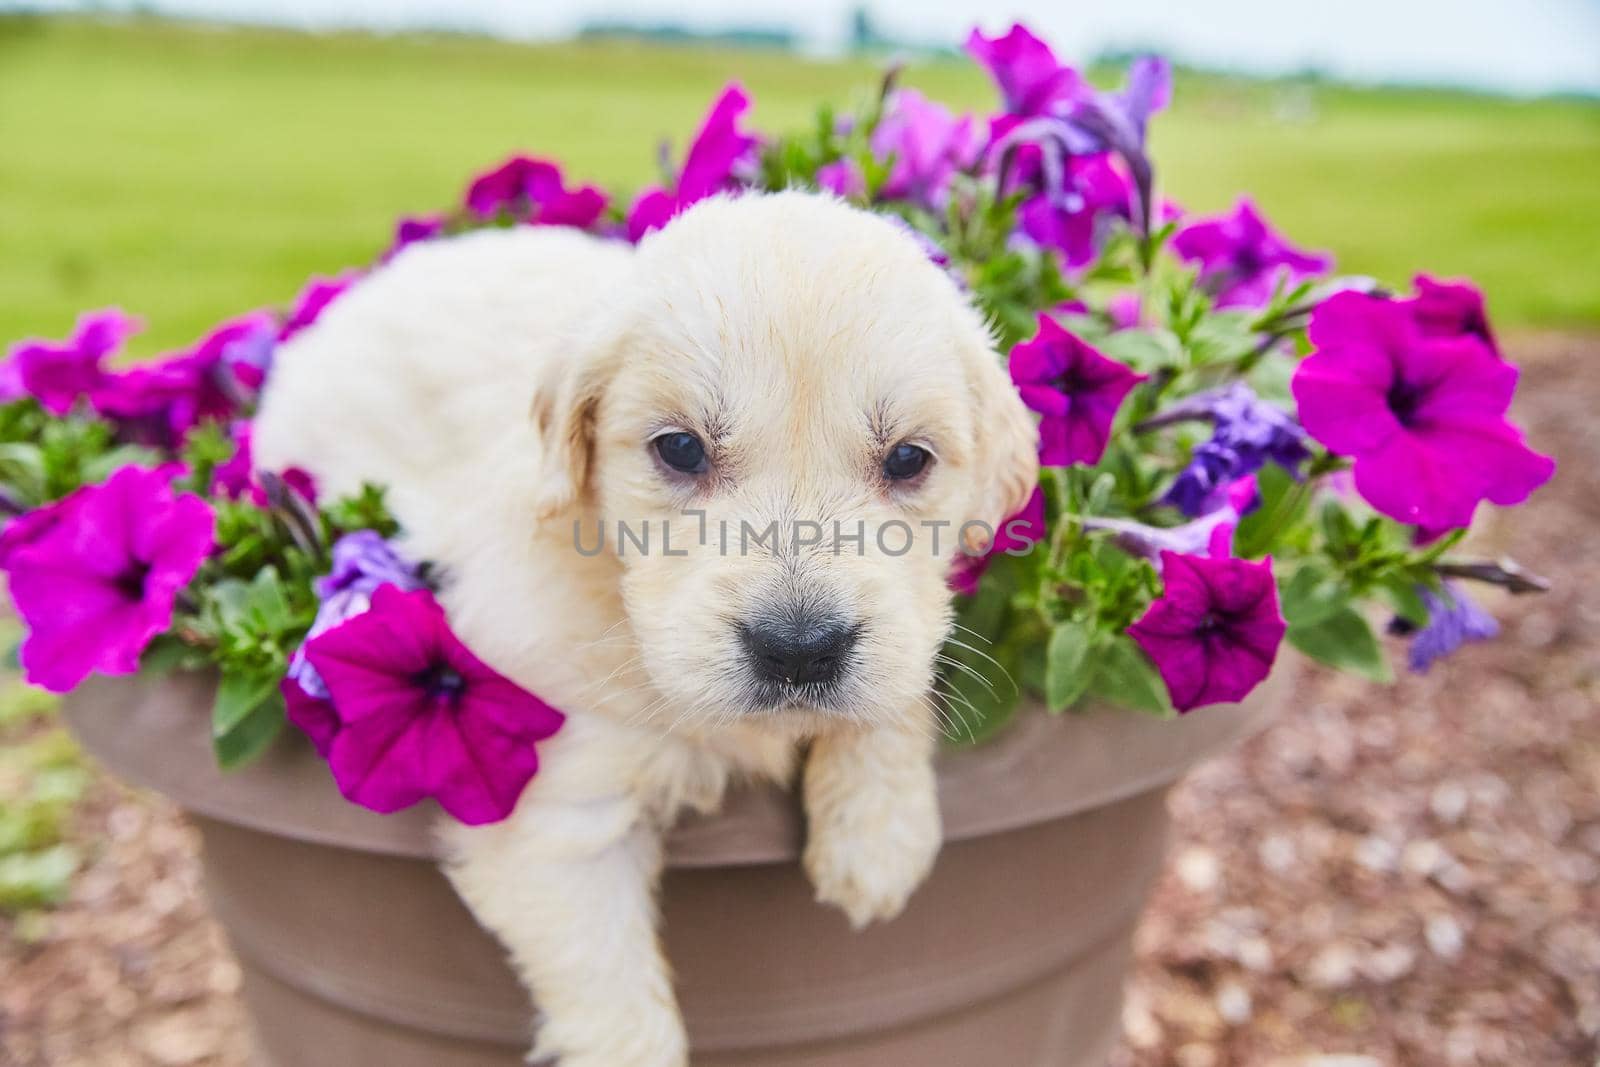 Image of Adorable golden retriever puppy looking at you in colorful purple flower planter